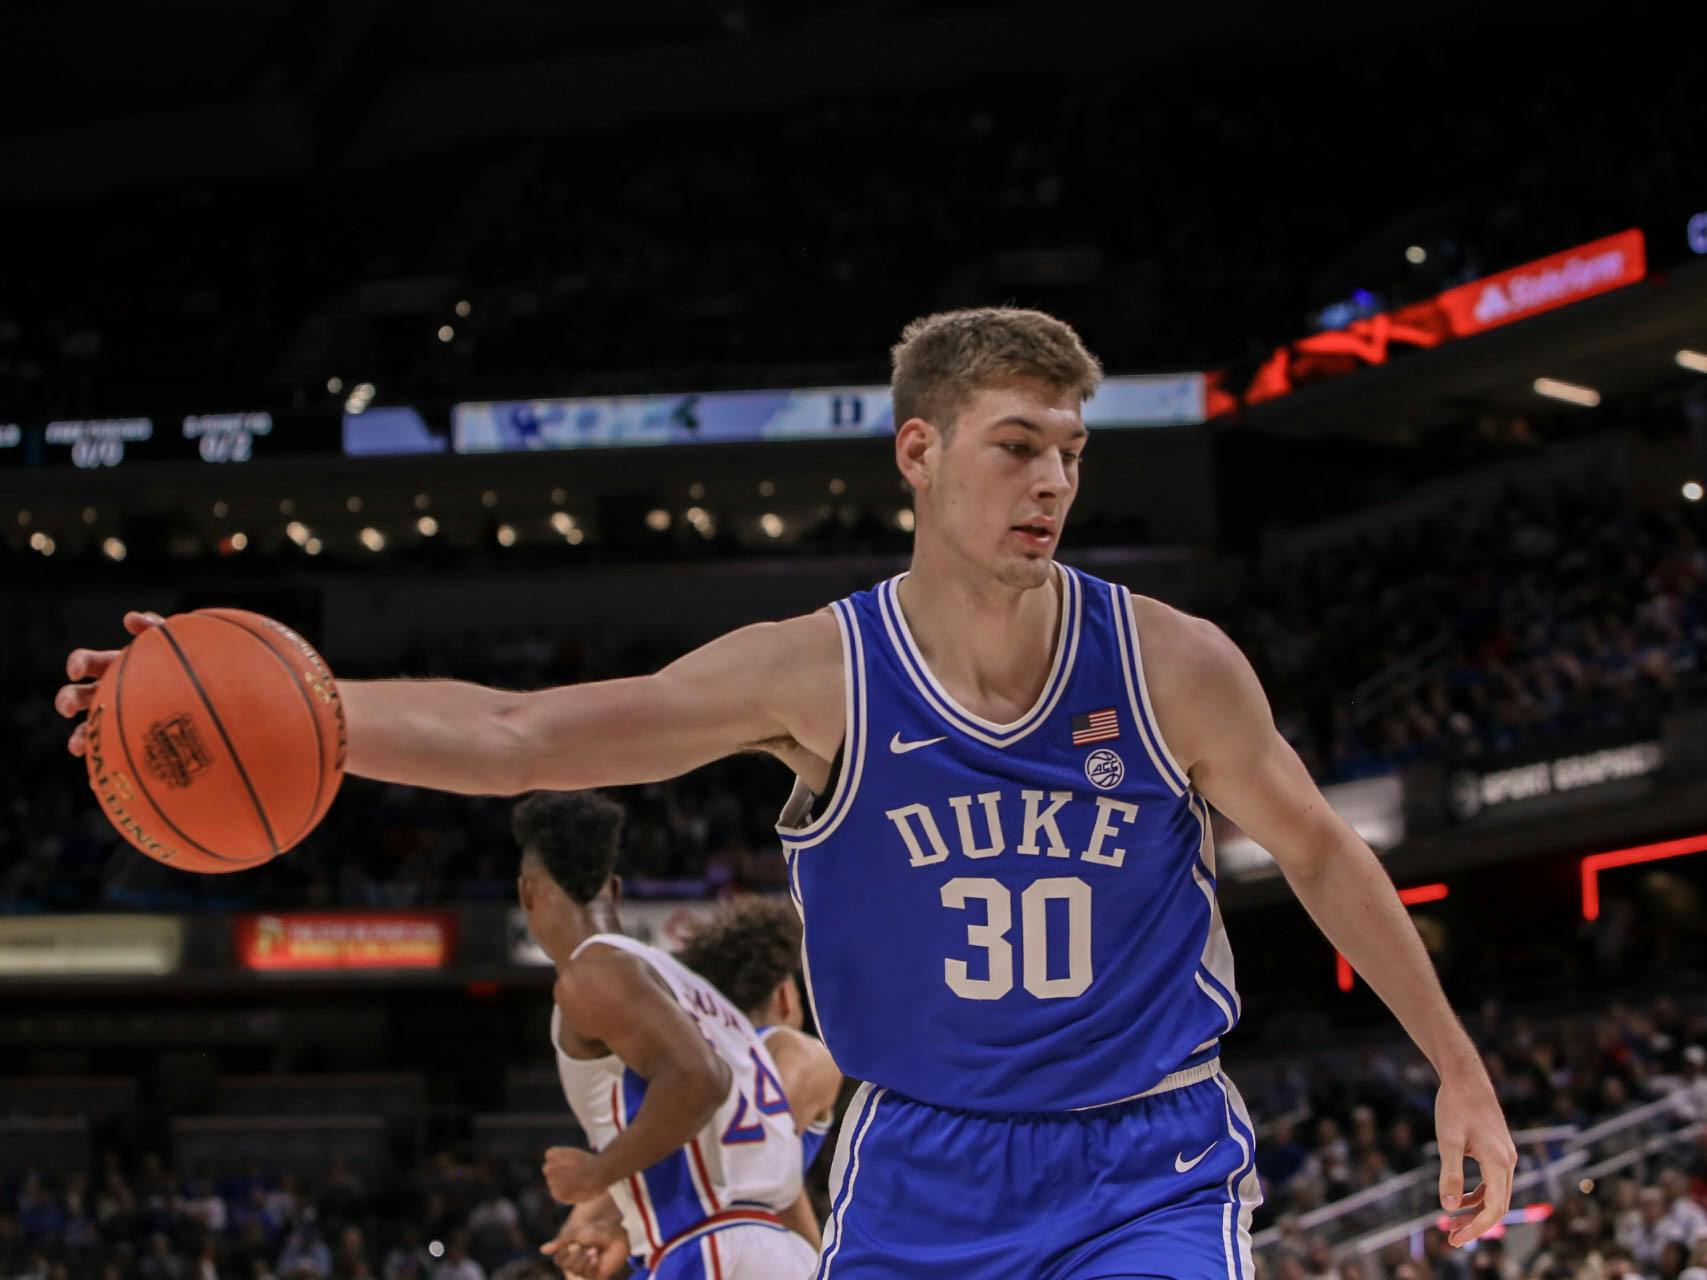 CRASHED OUT: Duke men's basketball stunned by Kansas in final